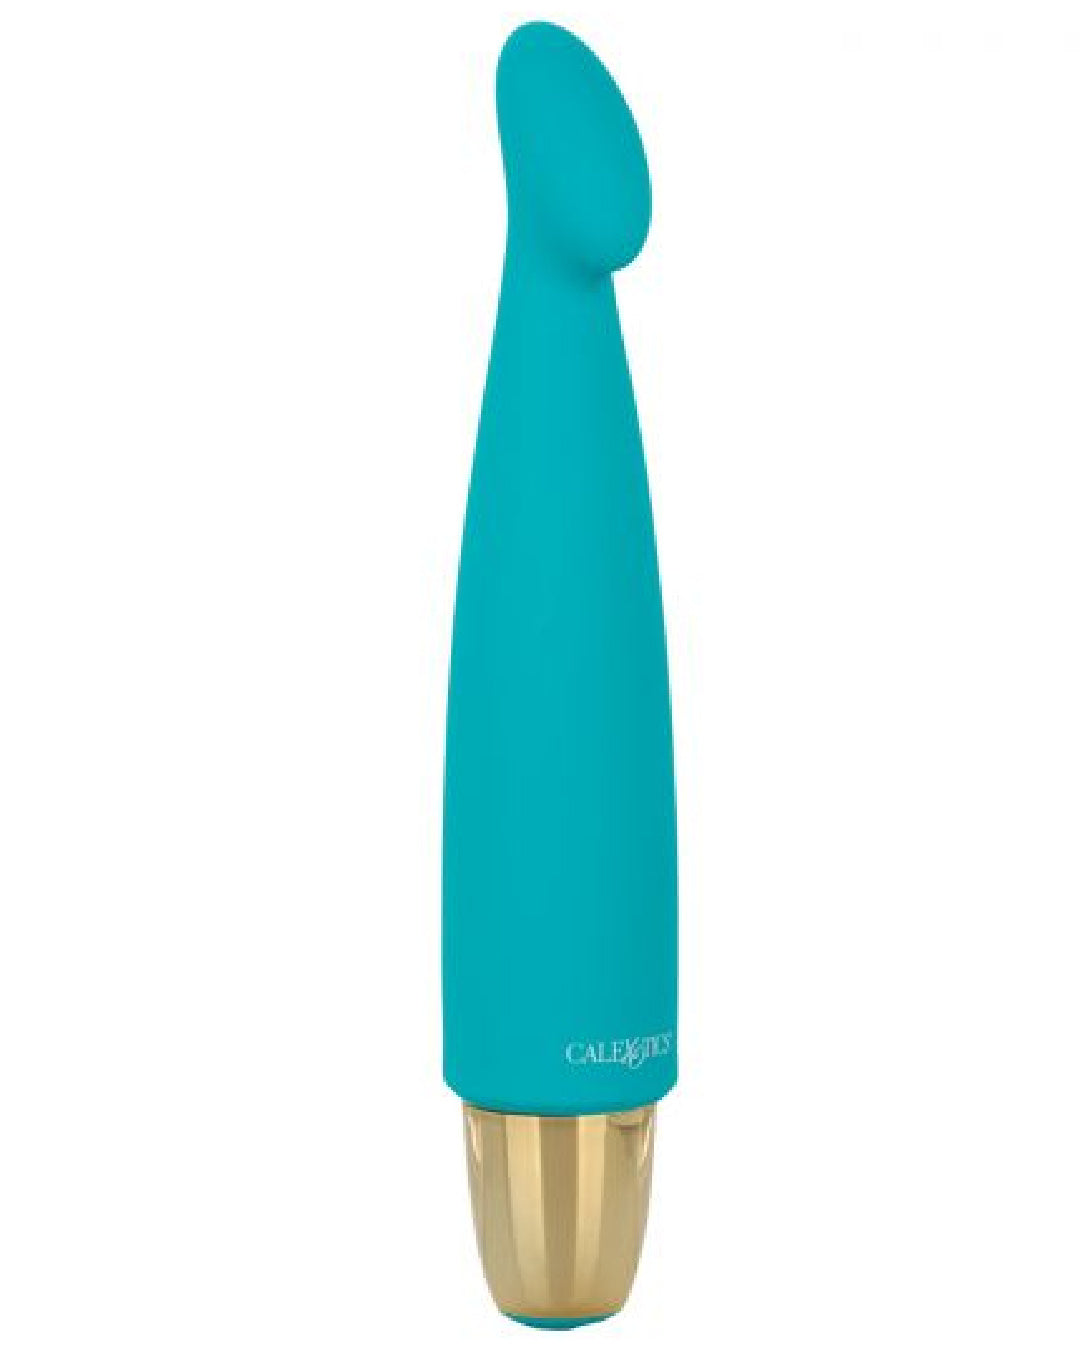 Slay Arouse Me Palm Sized Vibrator - Teal side view 